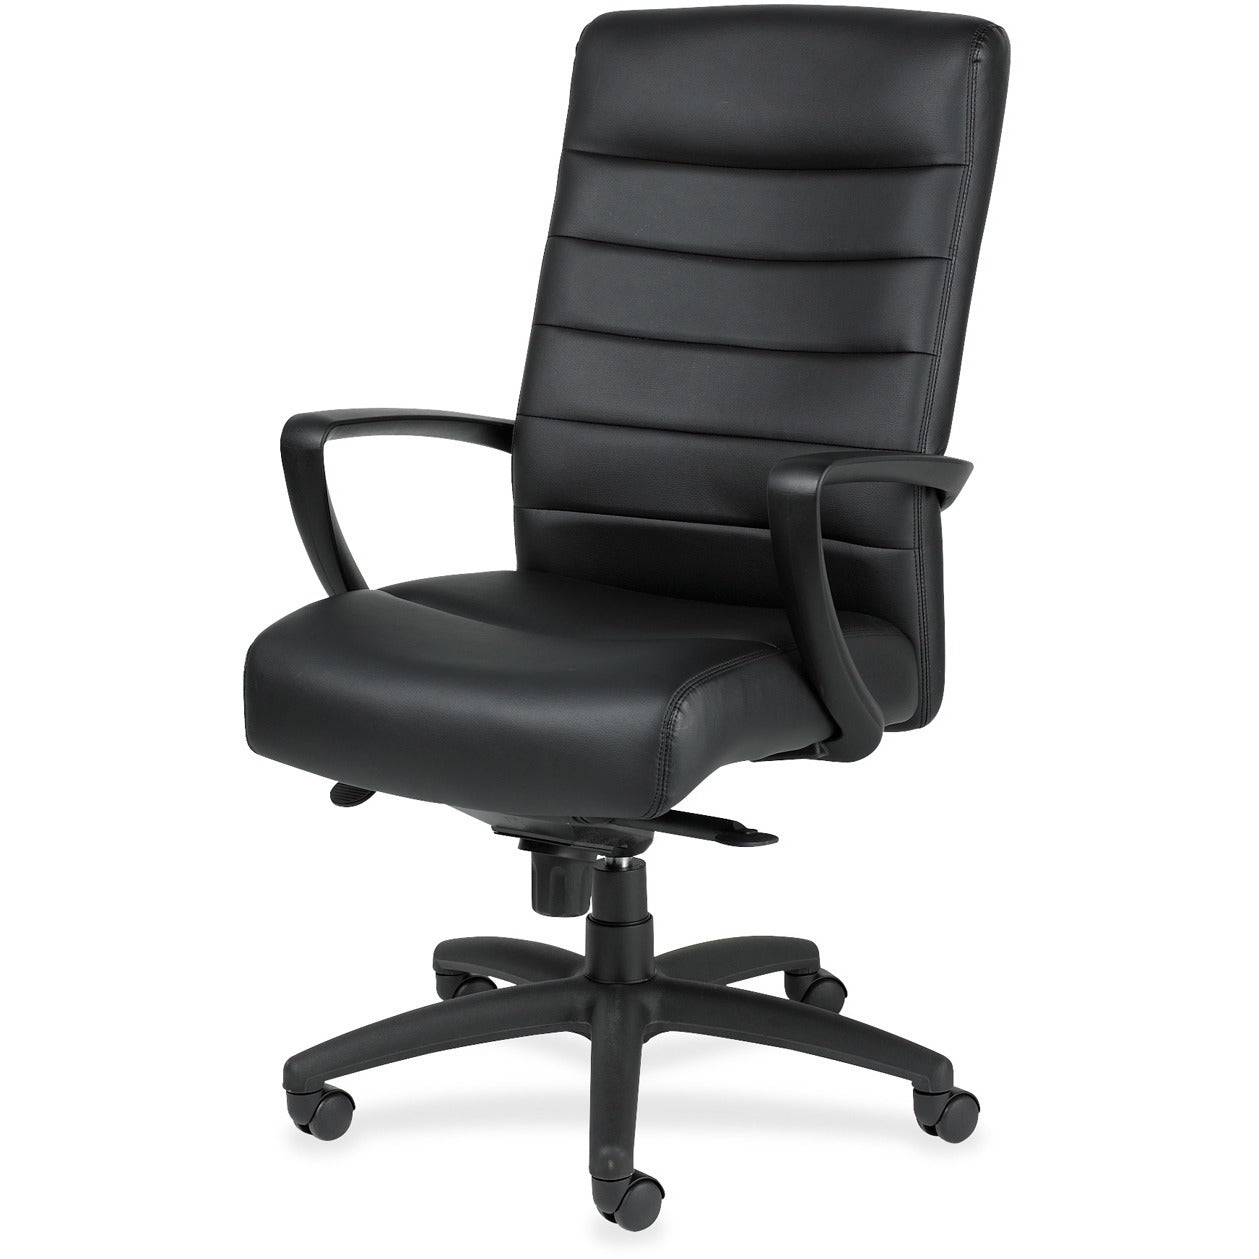 Eurotech Manchester High Back Executive Chair - Black Leather Seat - Black Leather Back - Steel Frame - 5-star Base - 1 Each - 3